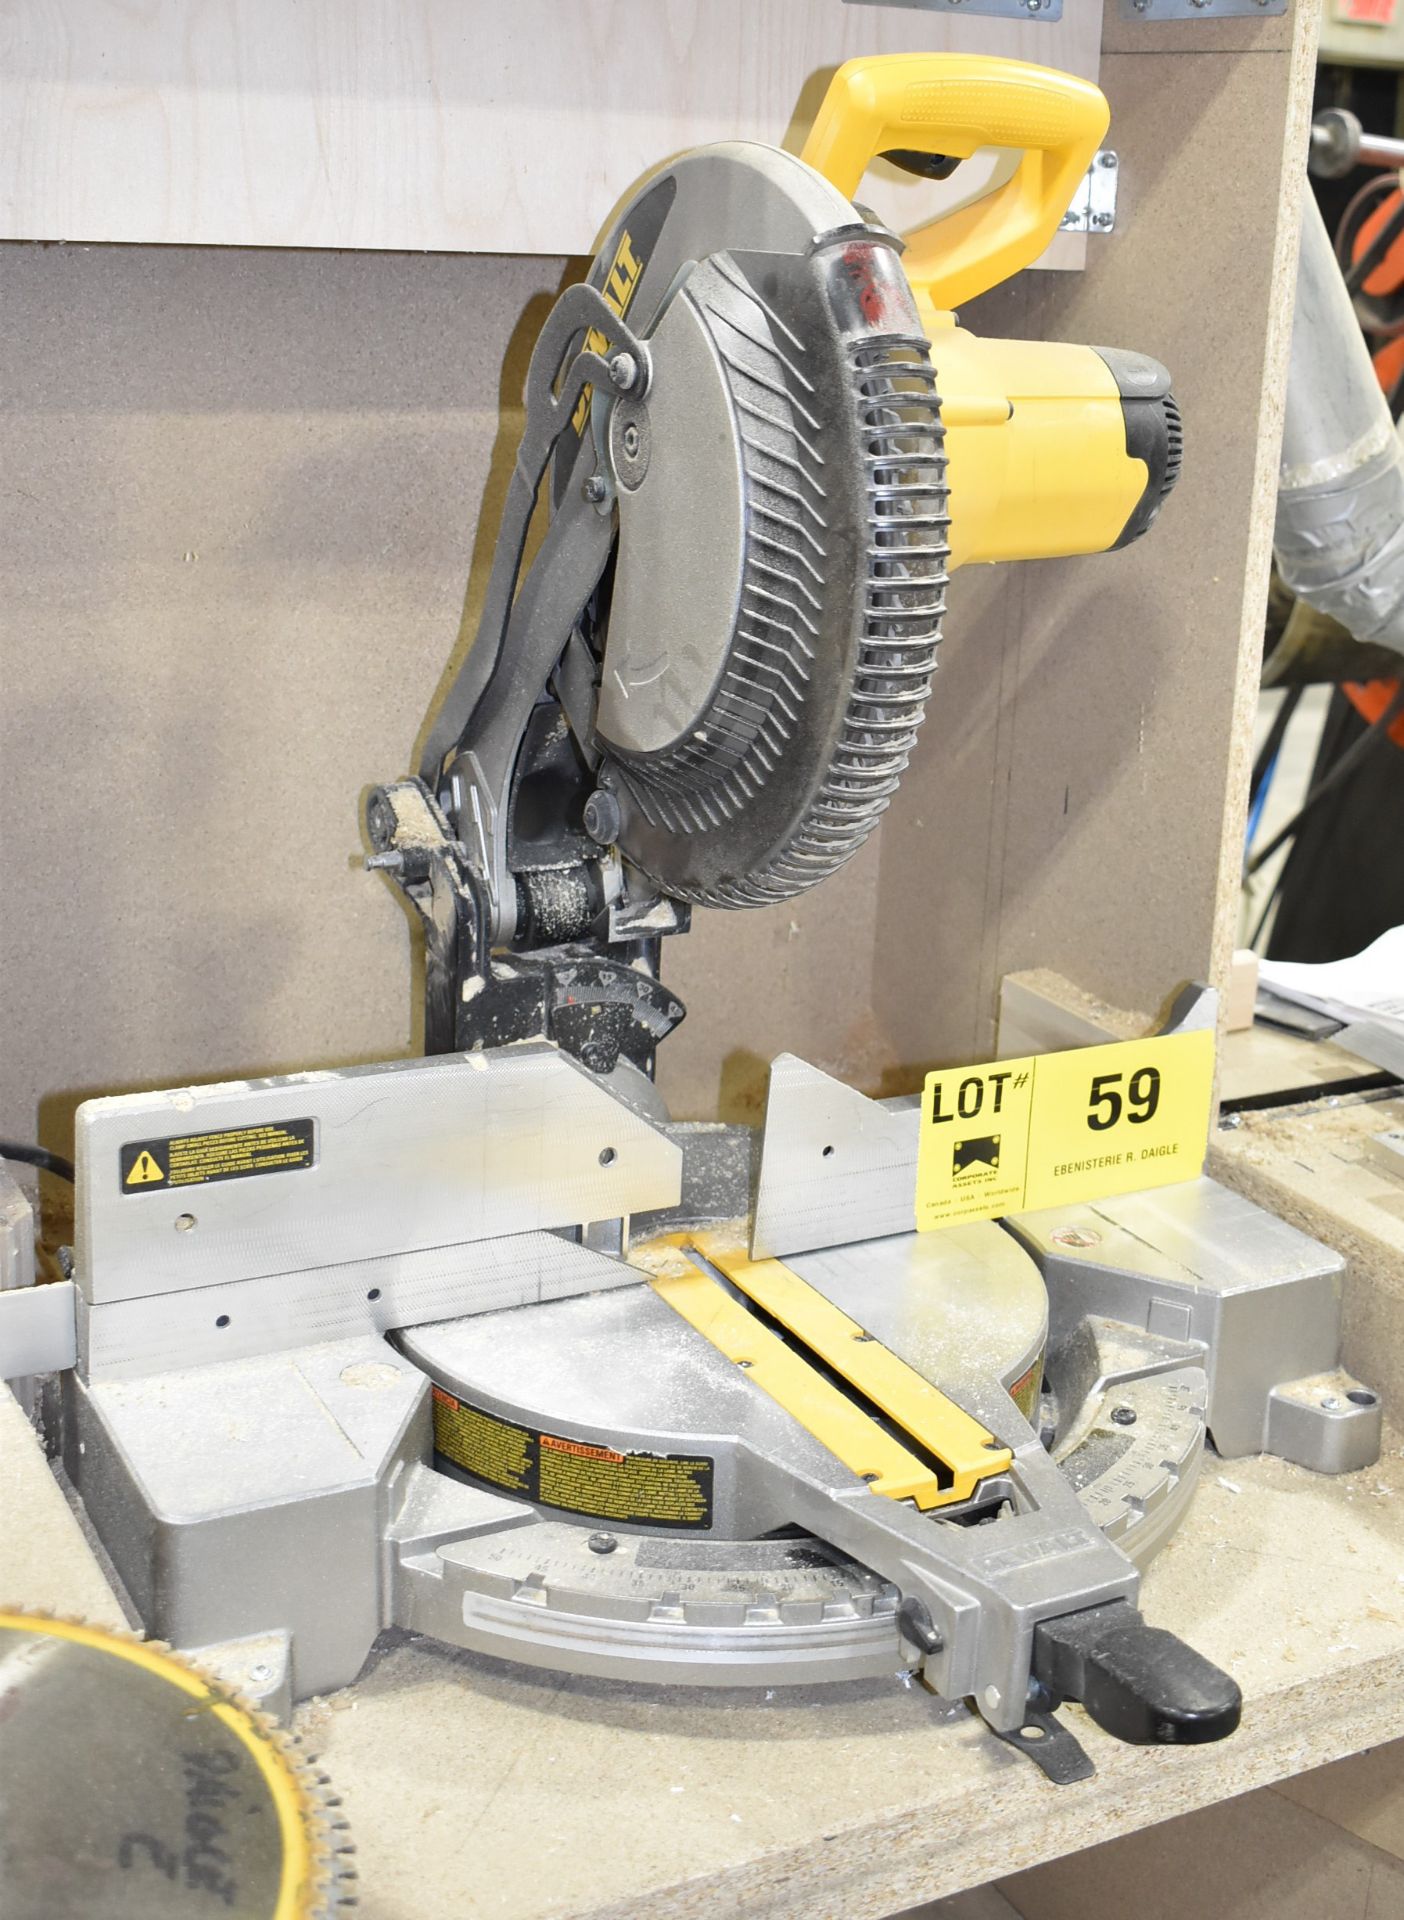 LOT/ DEWALT DW715 12" COMPOUND MITRE SAW WITH MANUAL LENGTH GAUGE, BLADES AND WORKBENCH [RIGGING FEE - Image 2 of 4